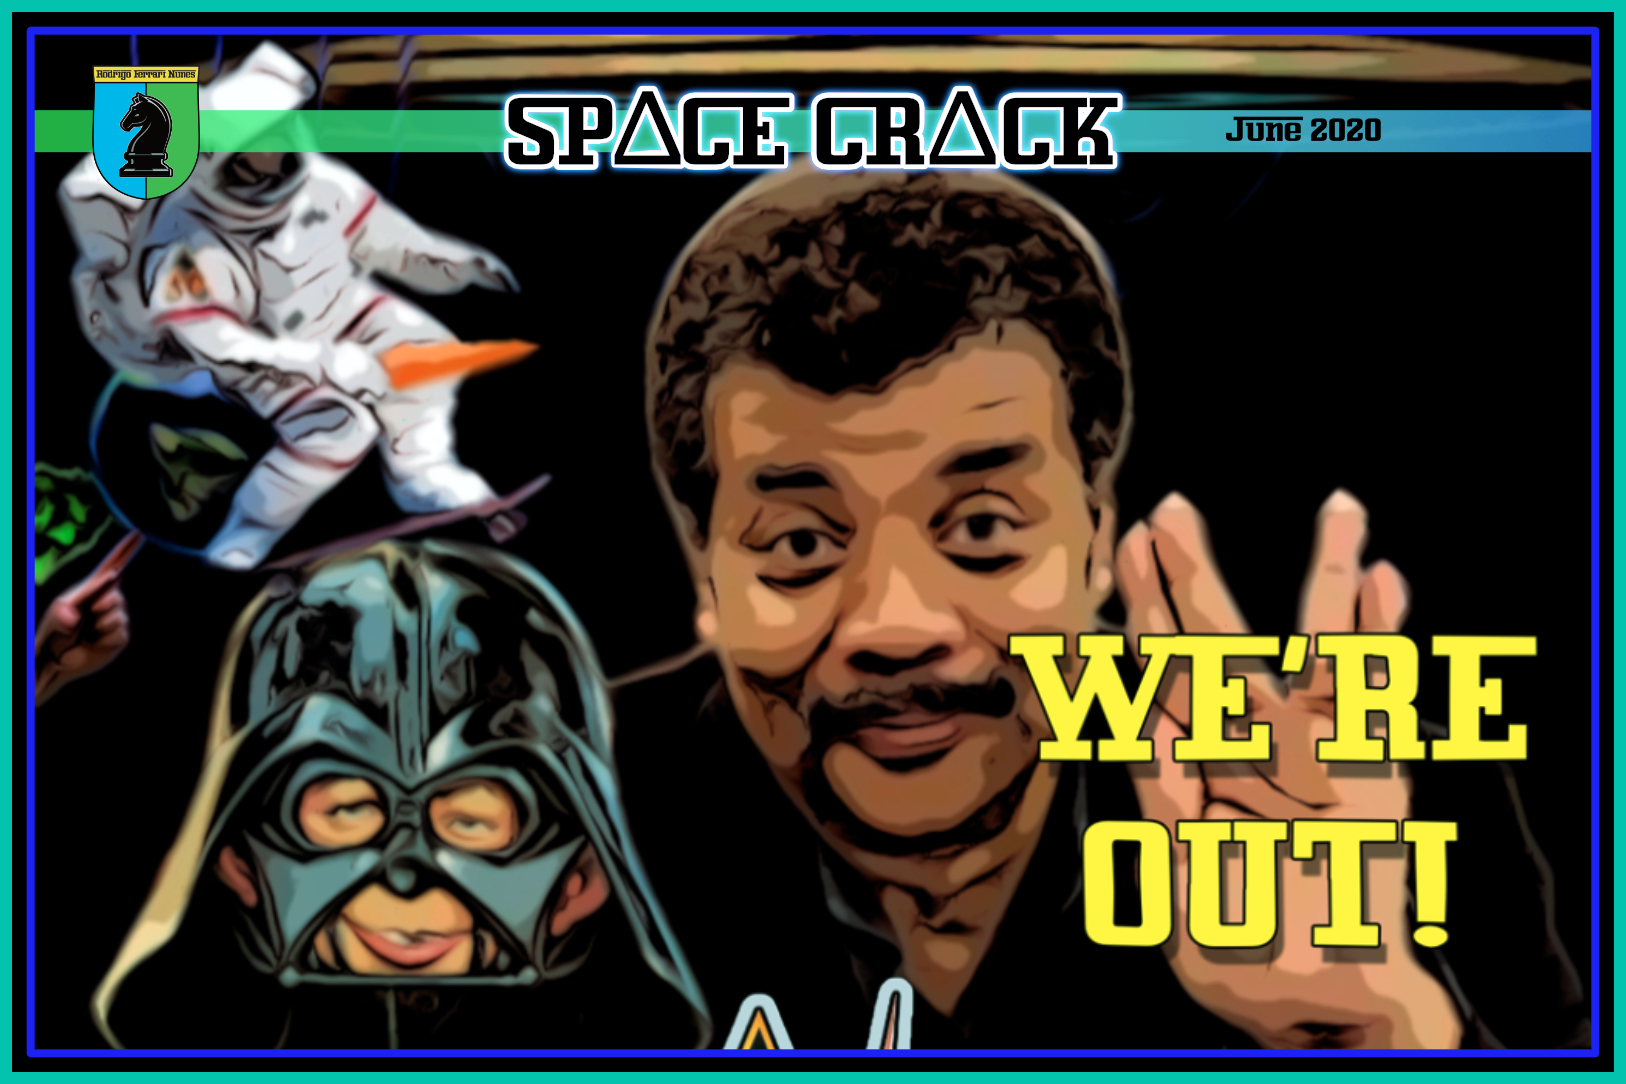 Space Crack Magazine, Volume 1, Jan 2020 – We’re Out!